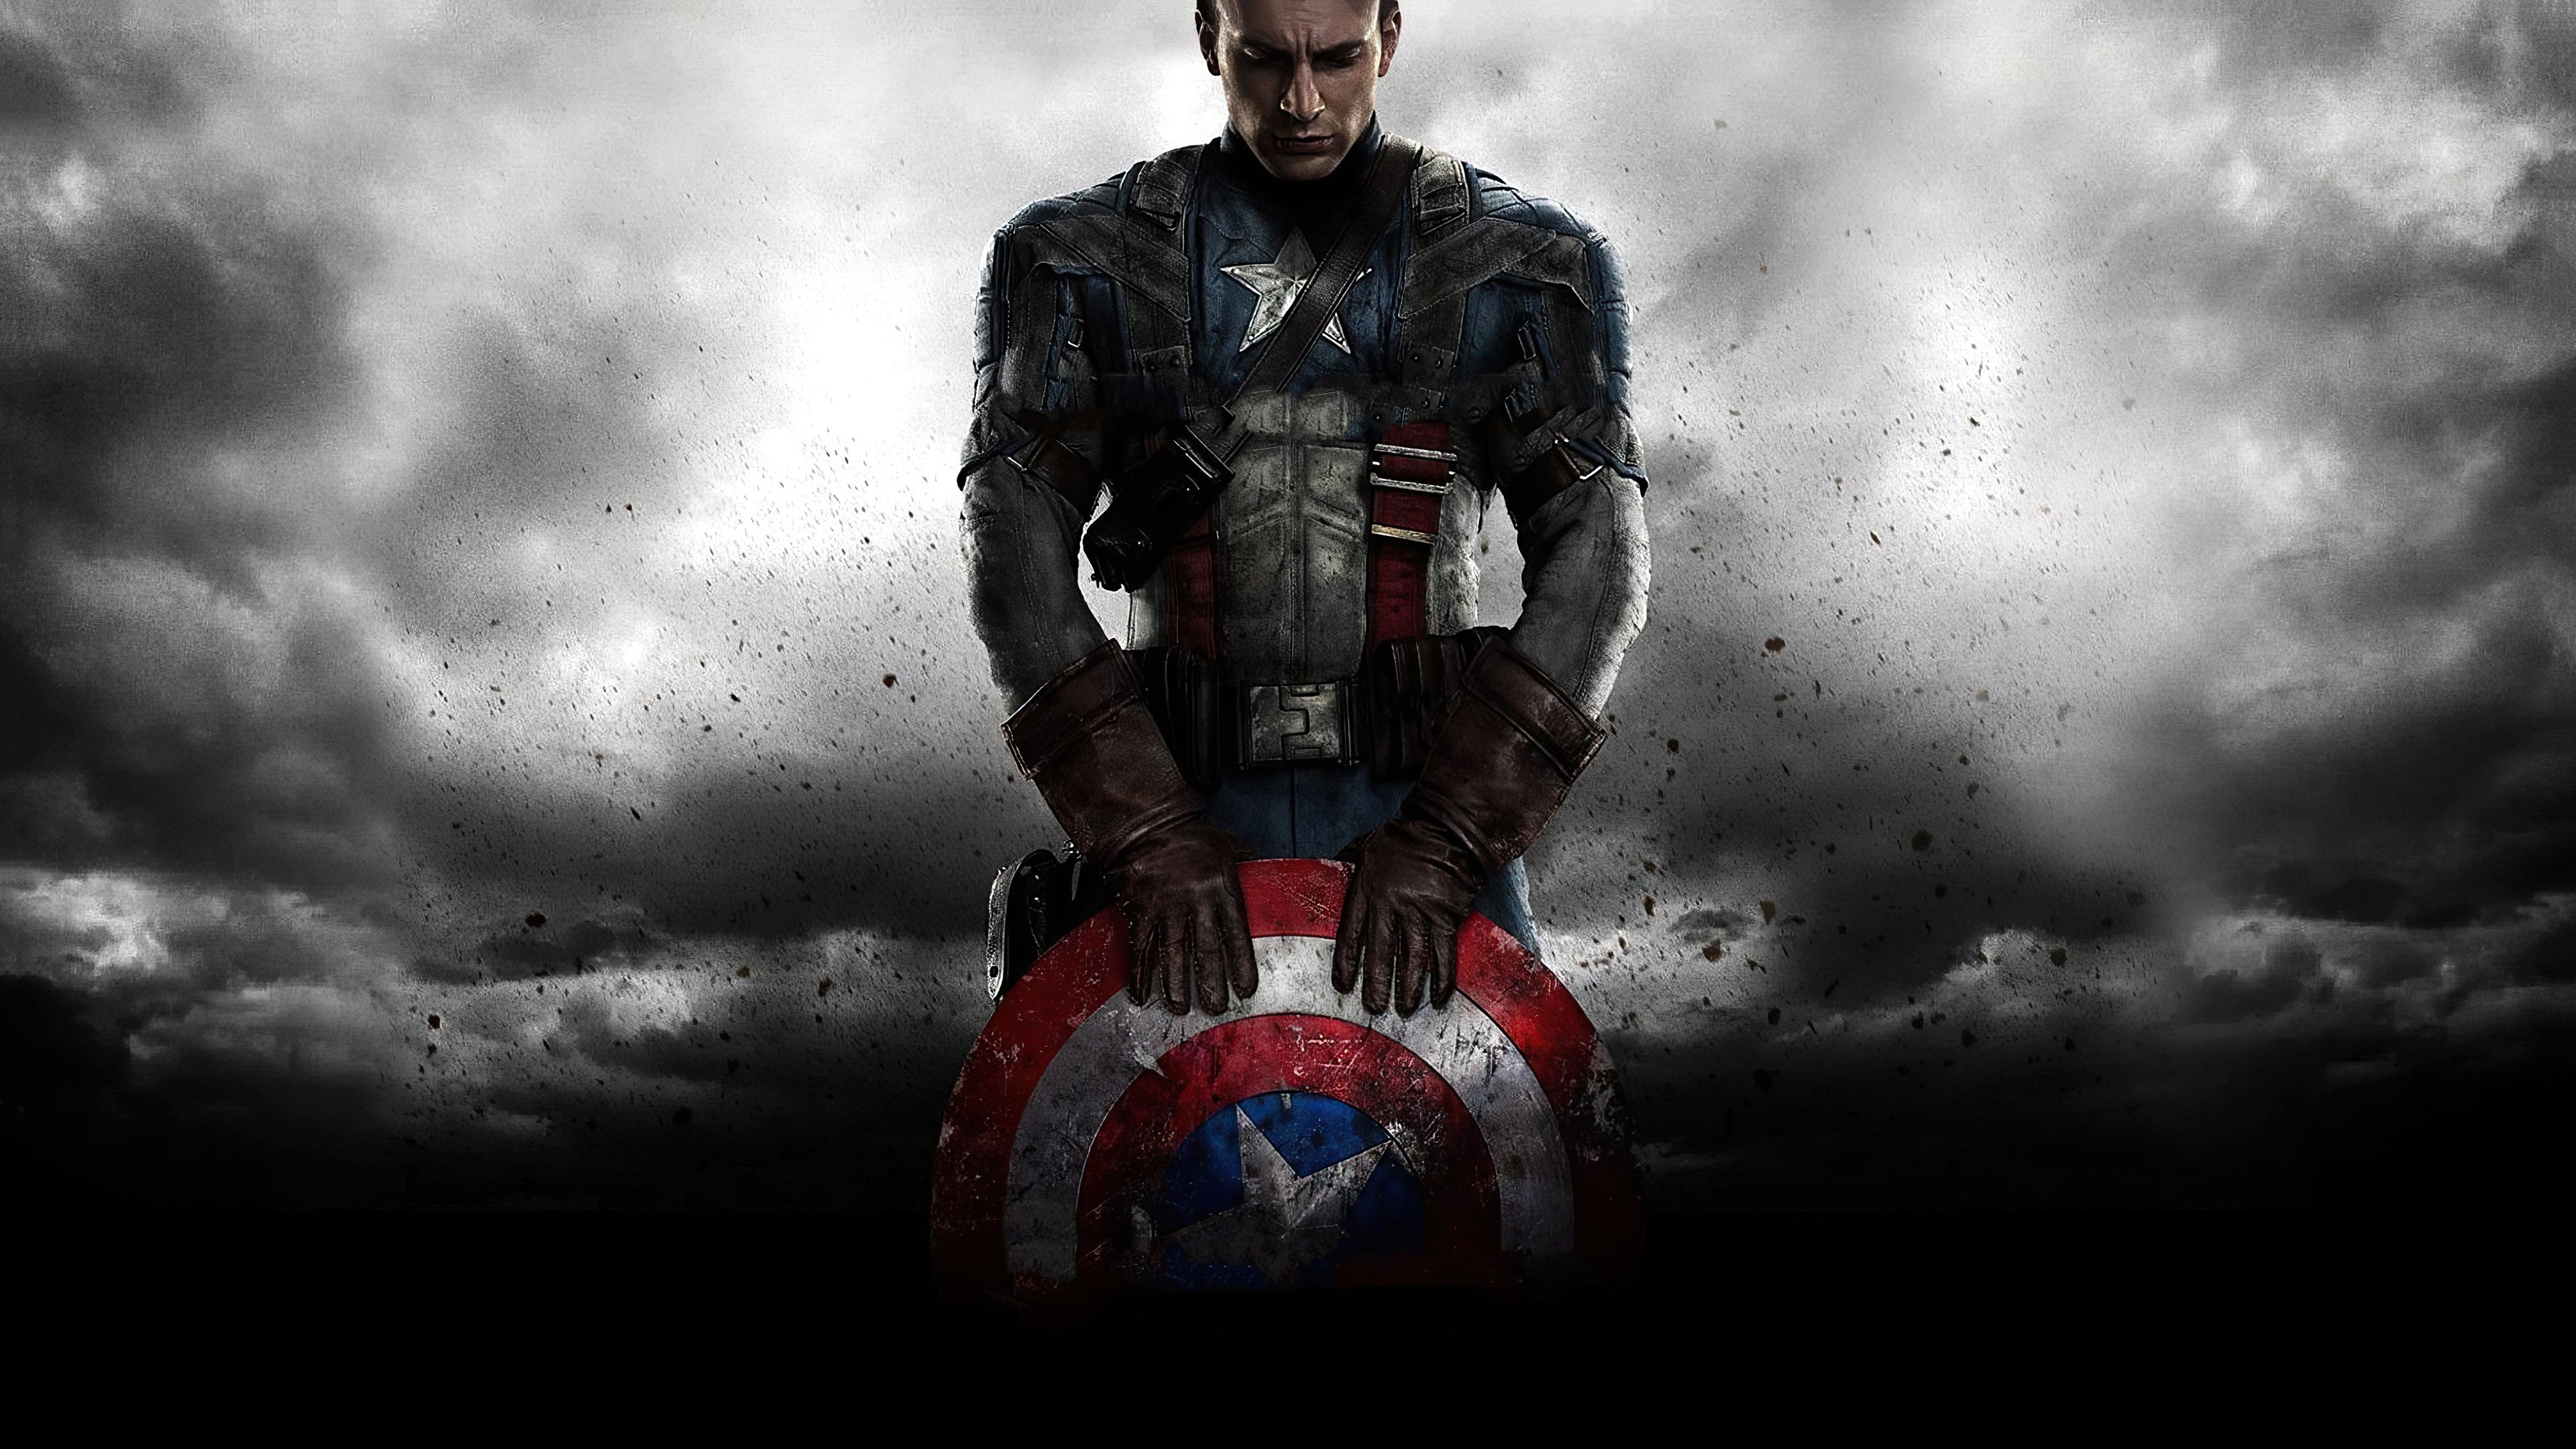 Steve Rogers Wallpapers 81 pictures